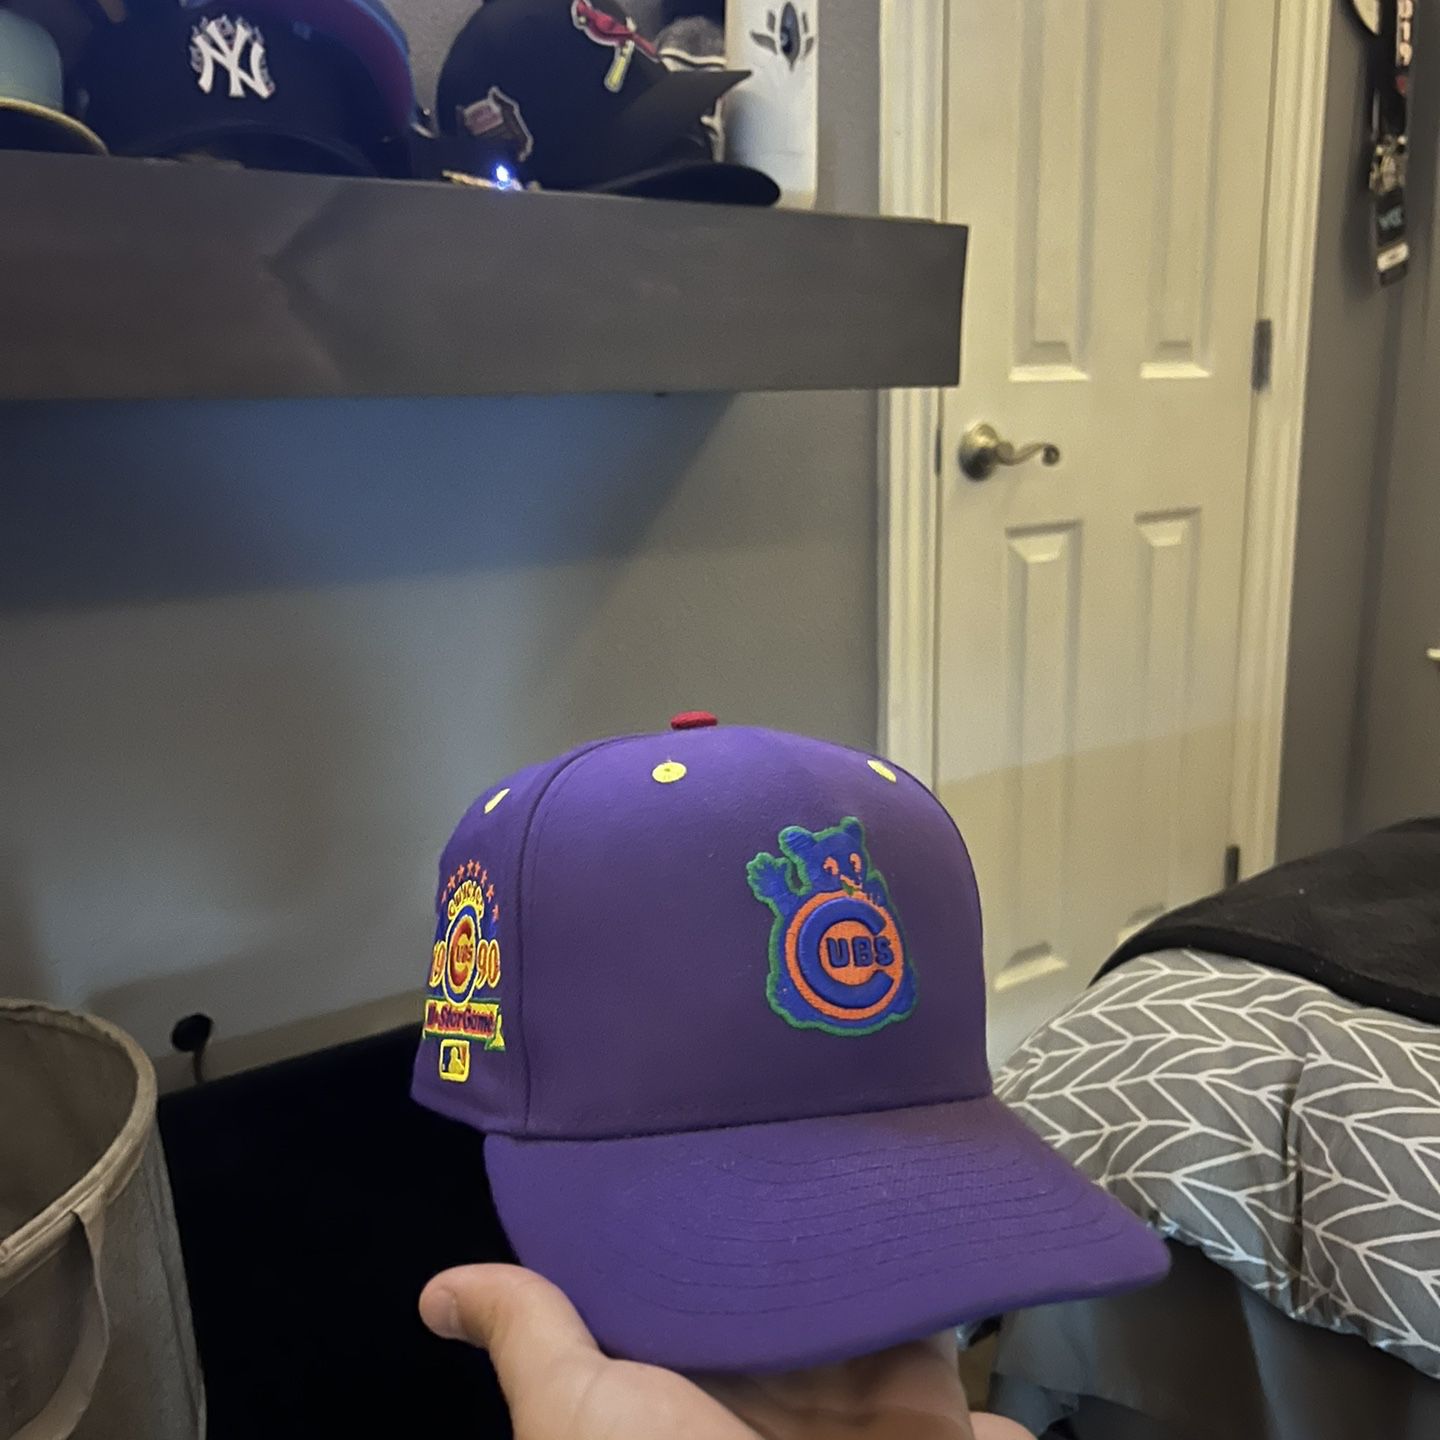 Cubs Big League Chew Fitted Hat for Sale in Stockton, CA - OfferUp